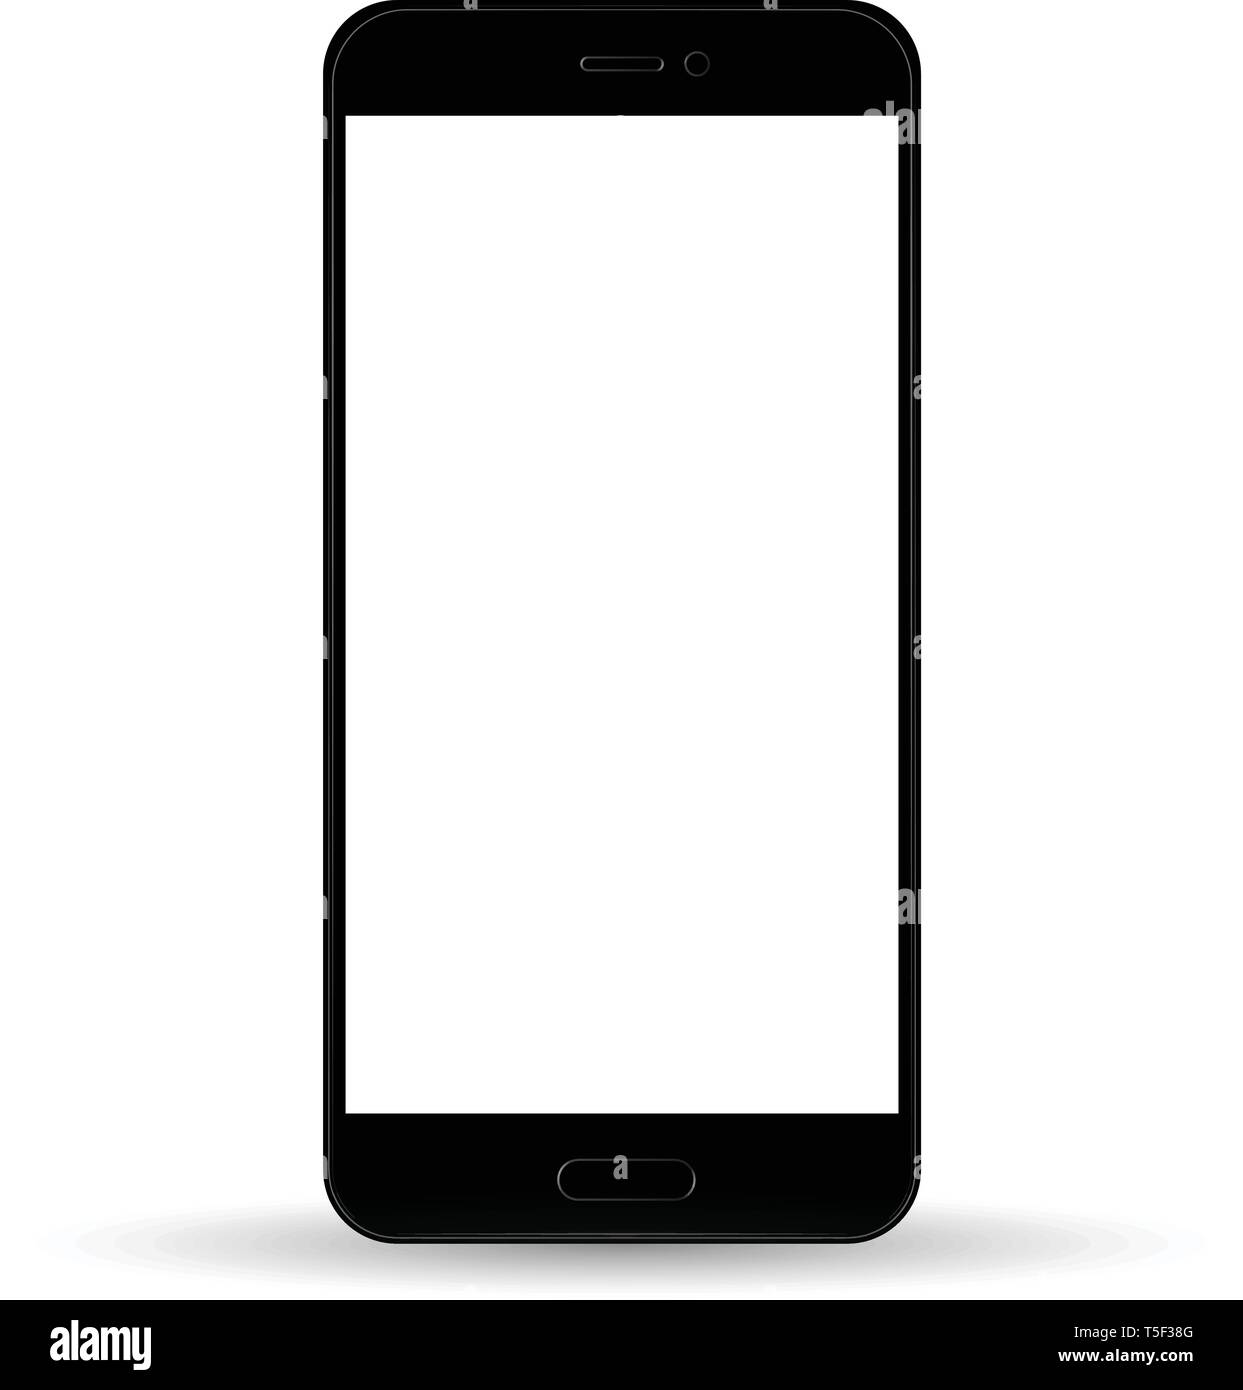 Smartphone in iphone style black color with blank touch screen isolated on  transparent background. stock vector illustration Stock Vector Image & Art  - Alamy